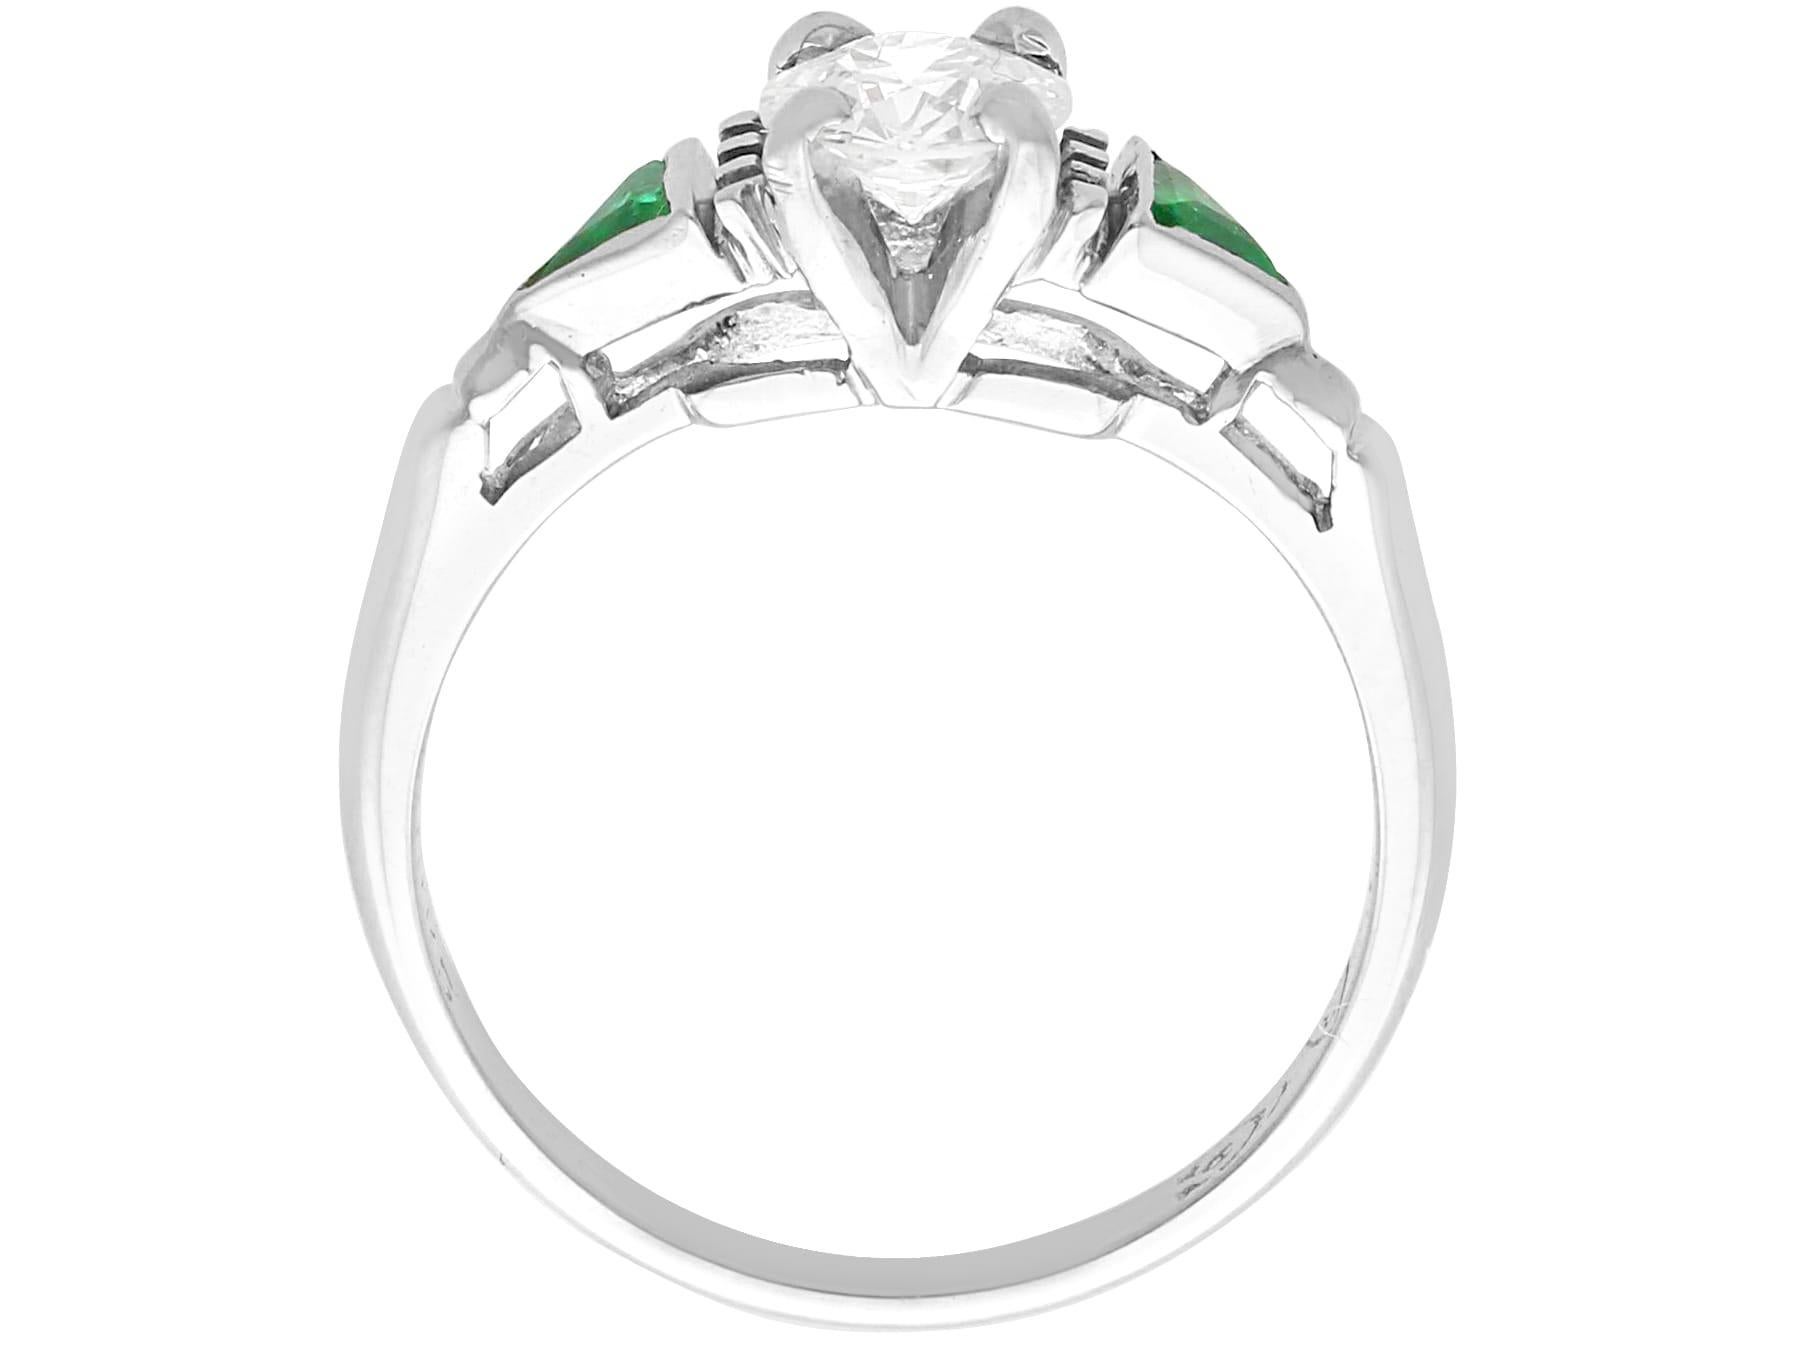 Vintage 0.55ct Diamond and 0.22ct Emerald 18k White Gold Trilogy Ring In Excellent Condition For Sale In Jesmond, Newcastle Upon Tyne